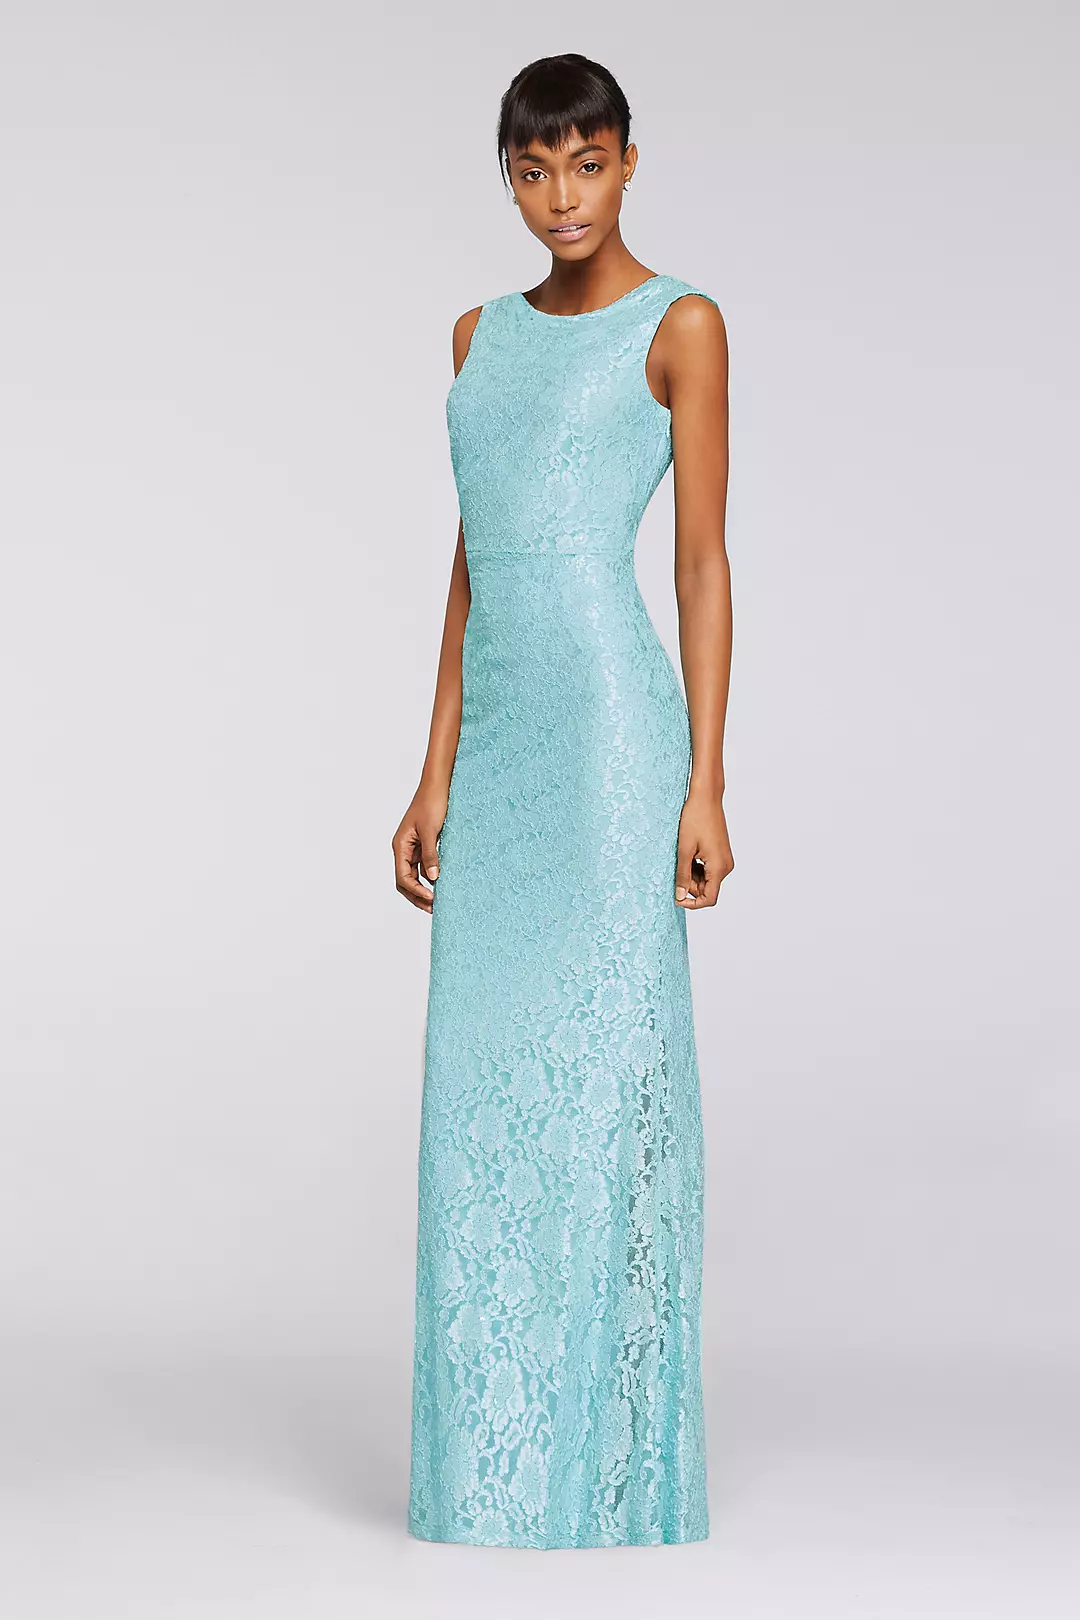 Sleeveless Allover Sequined Lace Dress Image